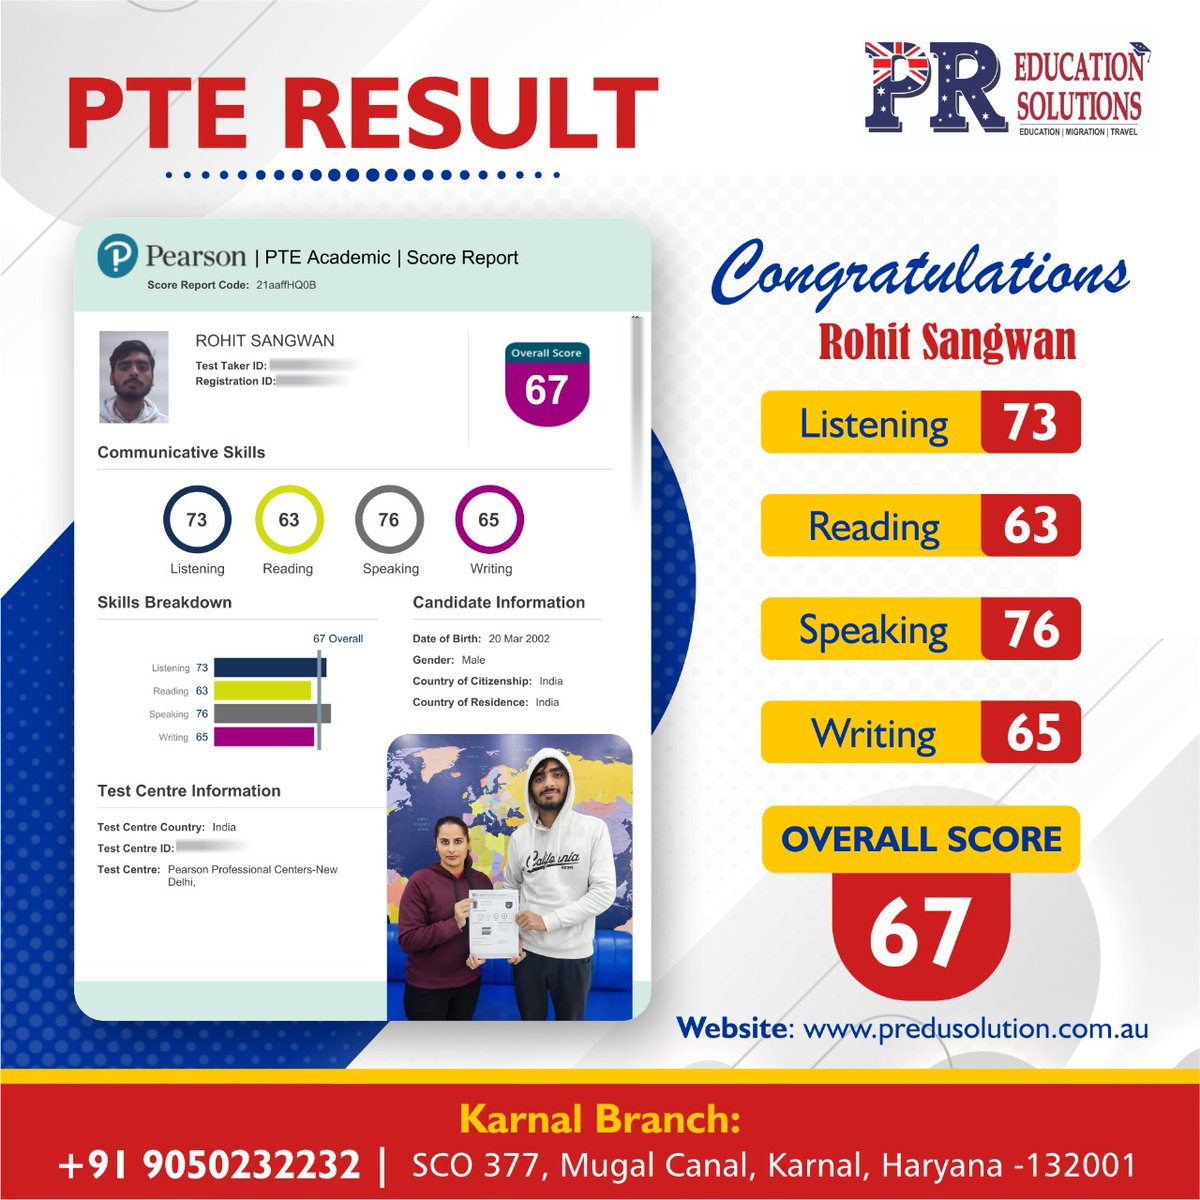 🎉🎉Congratulations 𝗠𝗿. Rohit Sangwan for achieving overall 67 Band Score in the first attempt. 🎉🎉

#predusolution #PTEprep #pteexampreparation #ptecoaching  #ptewriting #bestpteinstitute #TopPerformer #karnal #karnalcity #admissions #admissionsopen2023  #australiavisagrant